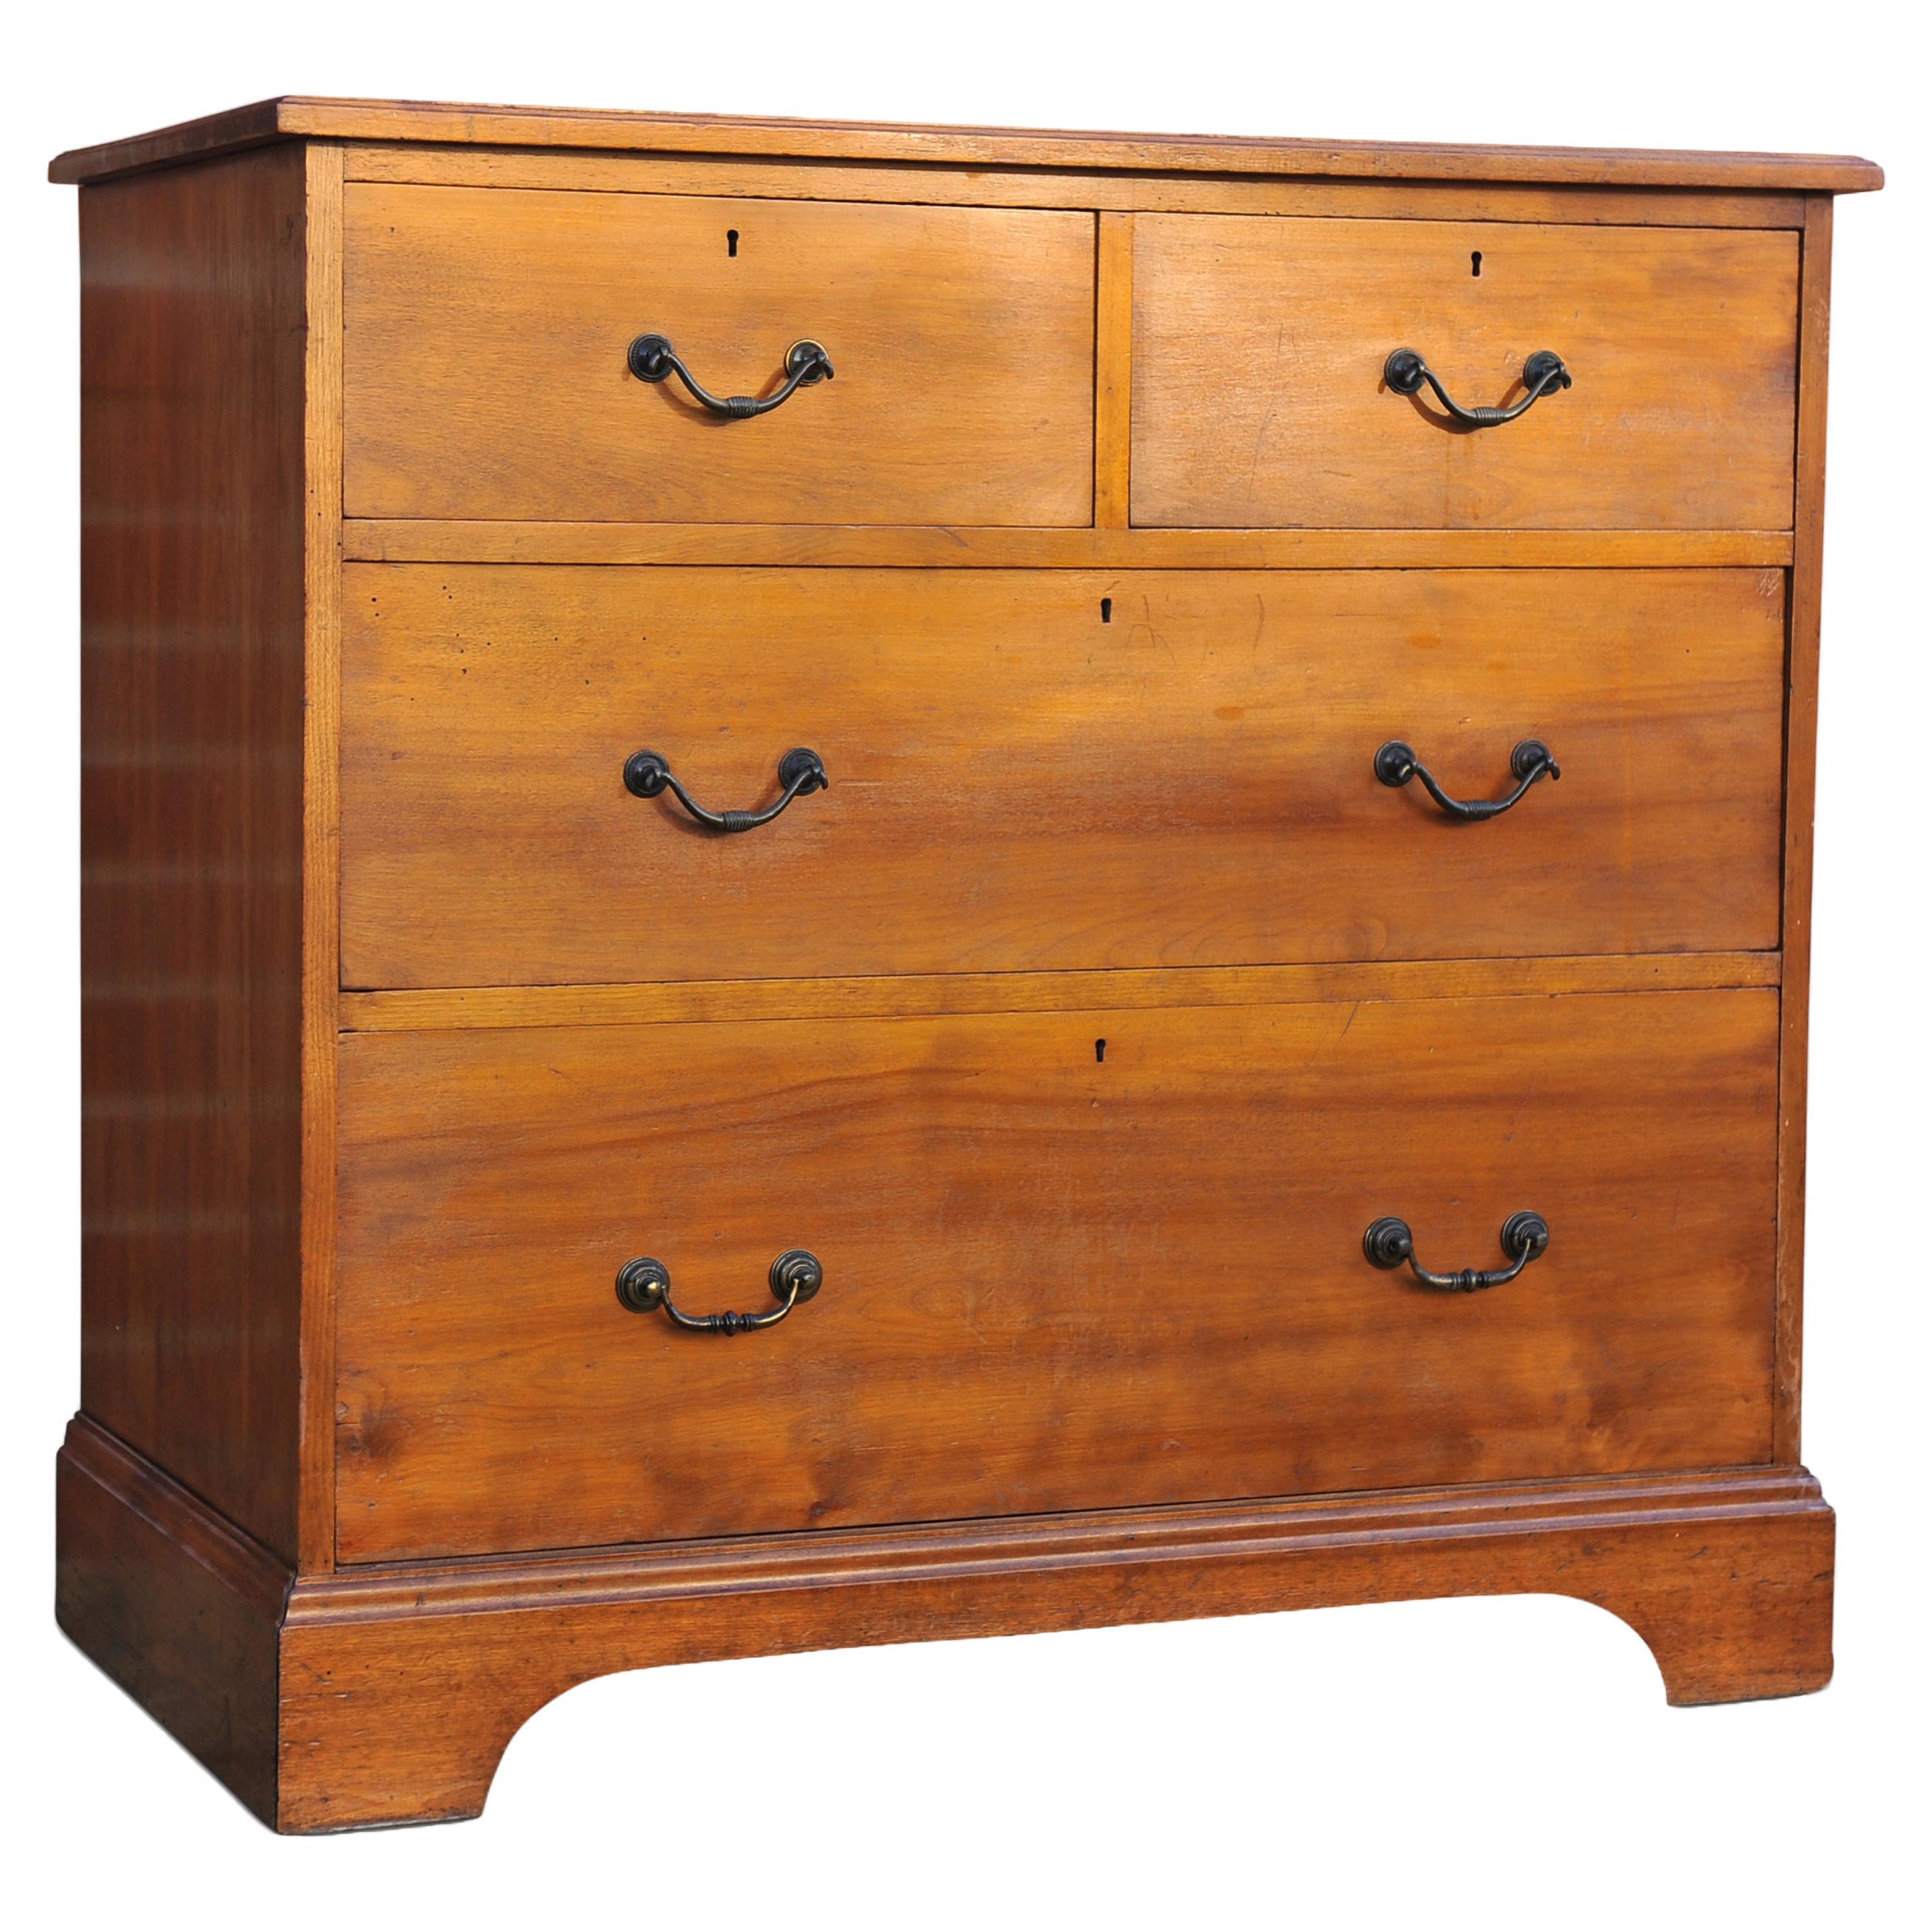 Howard & Sons Hand Crafted Cherrywood Dresser / Bureau With Brass Drop Handles  For Sale